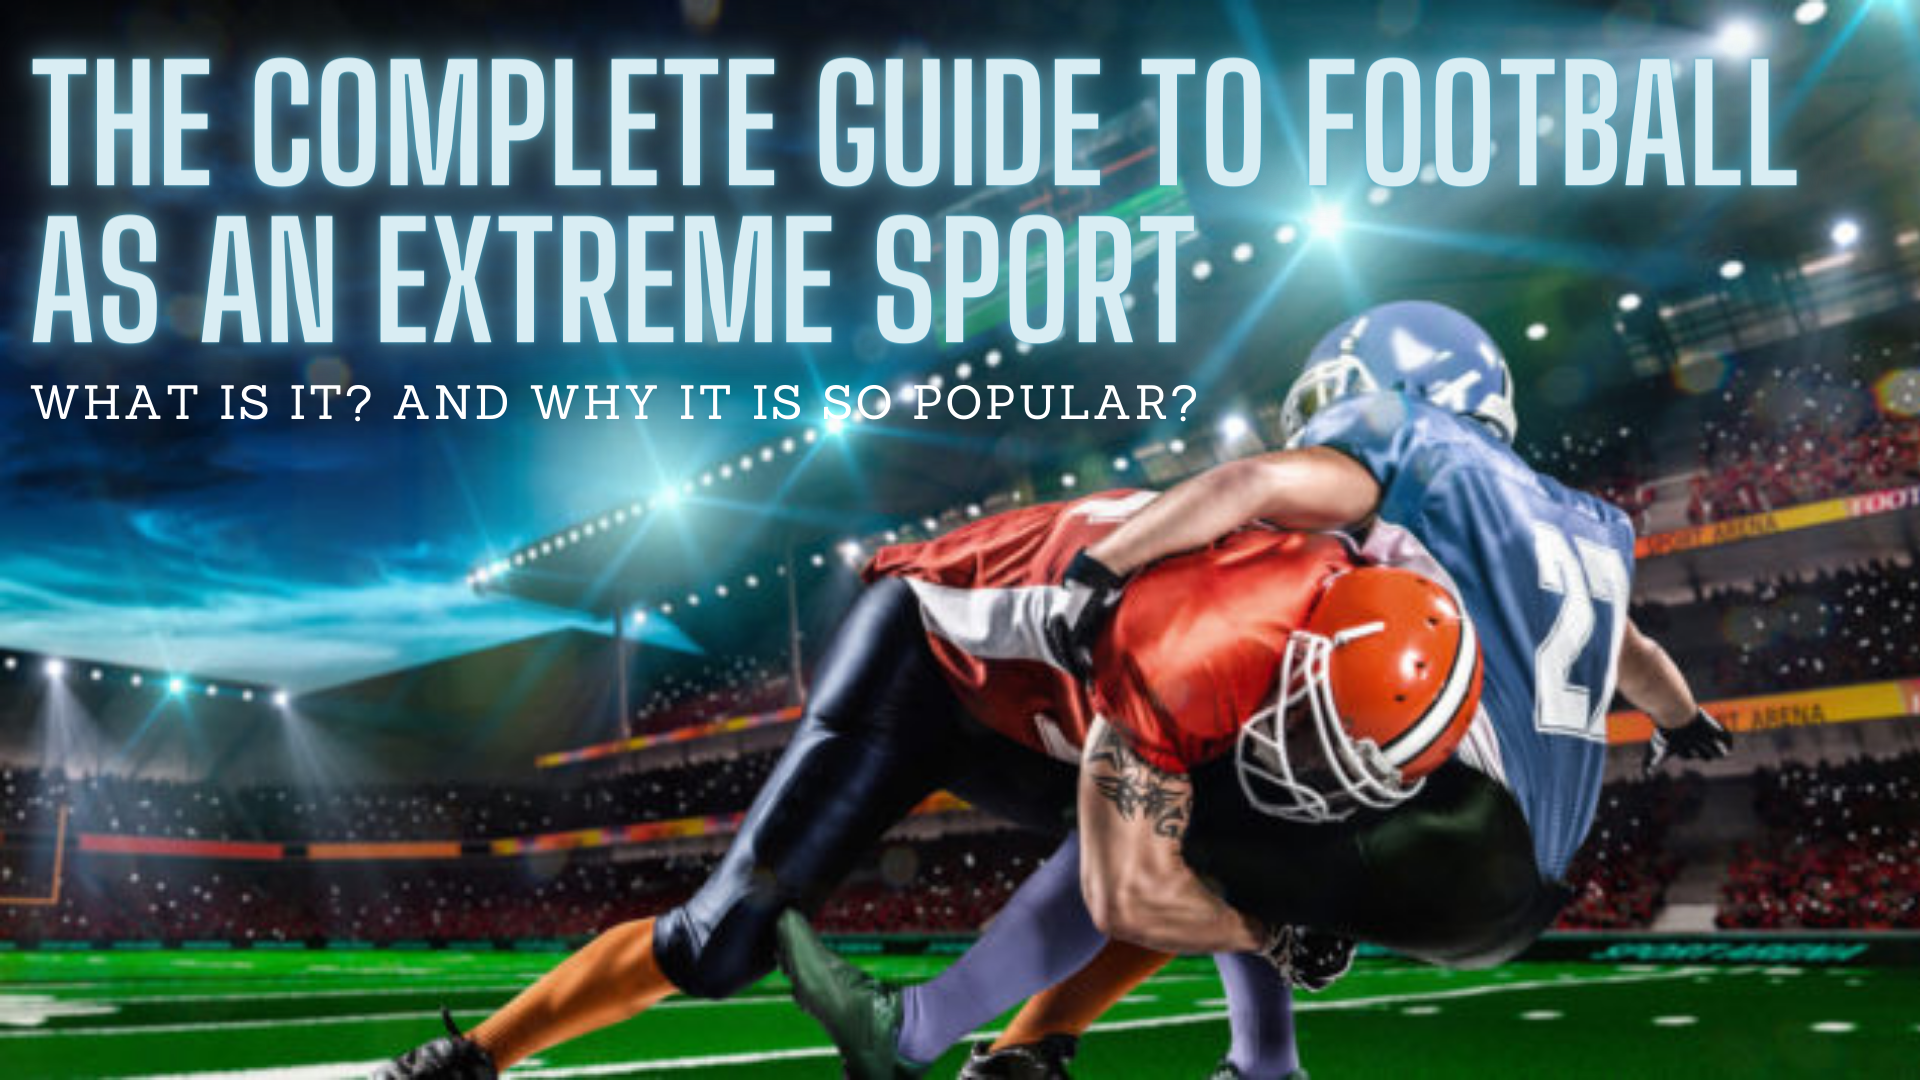 The Complete Guide To Football As An Extreme Sport